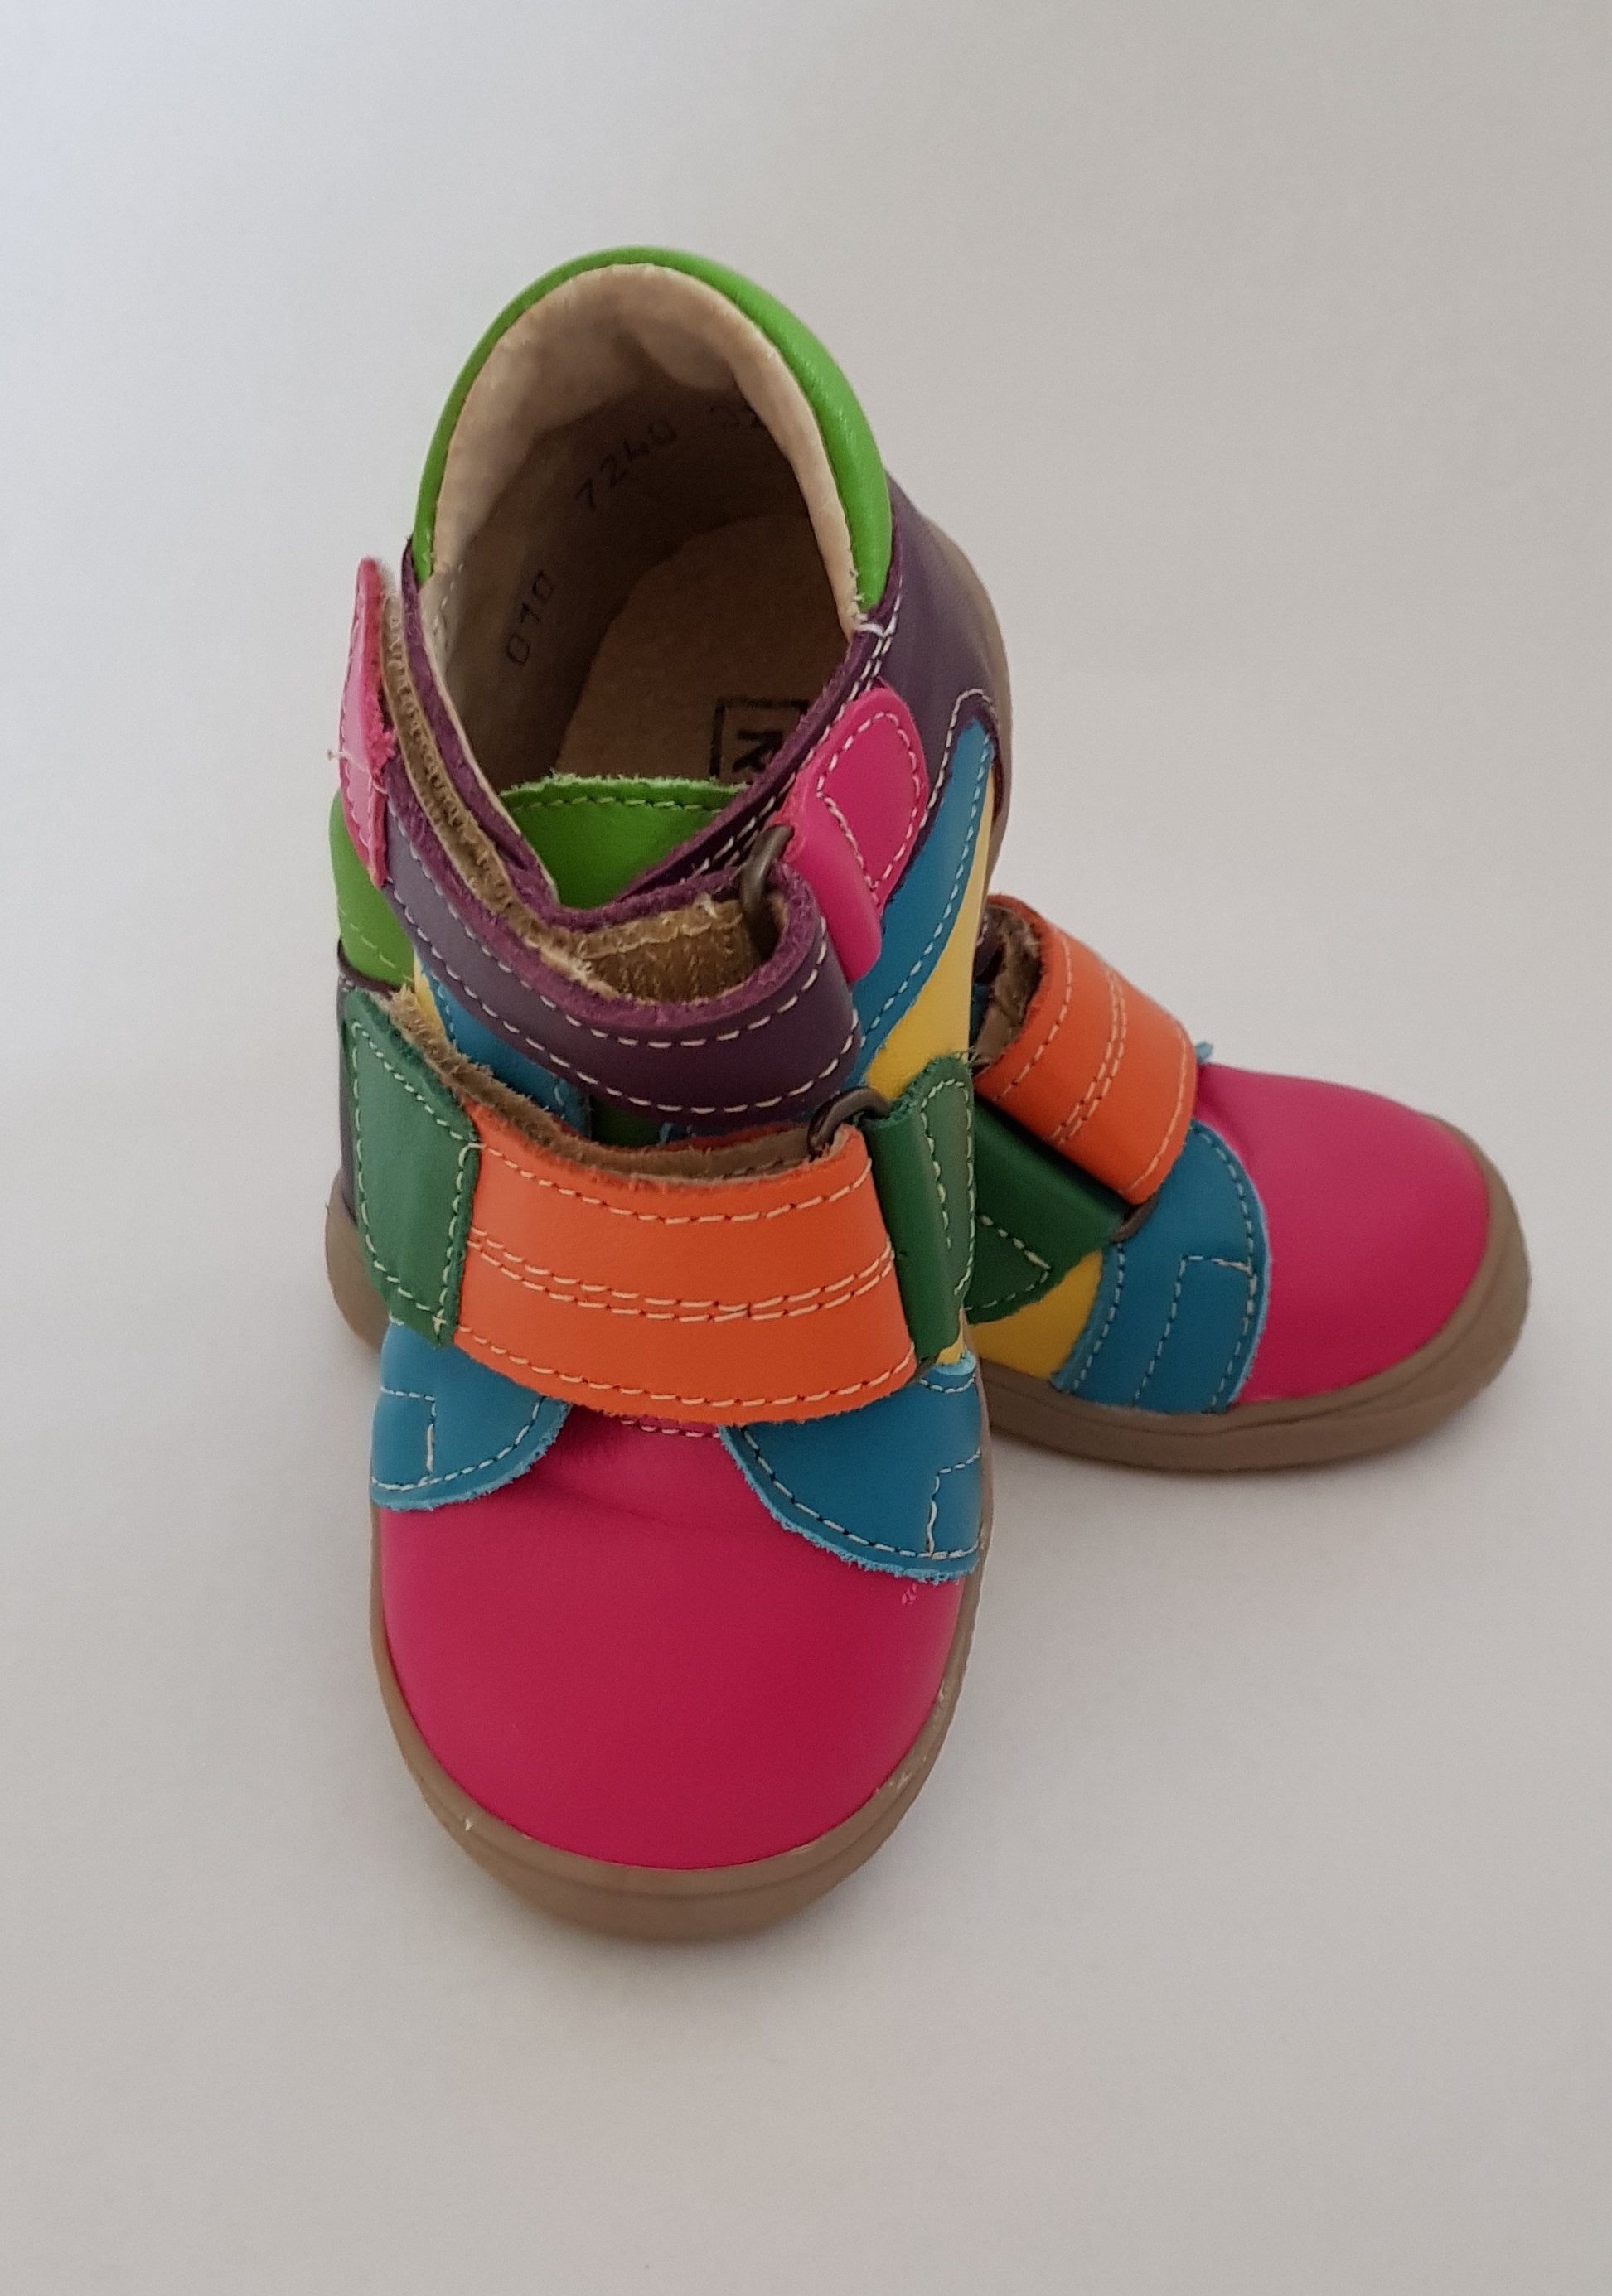 Colourful, Rainbow Handmade High-quality Children Shoes with brown sole, hook-and-loop fasteners and round toe box